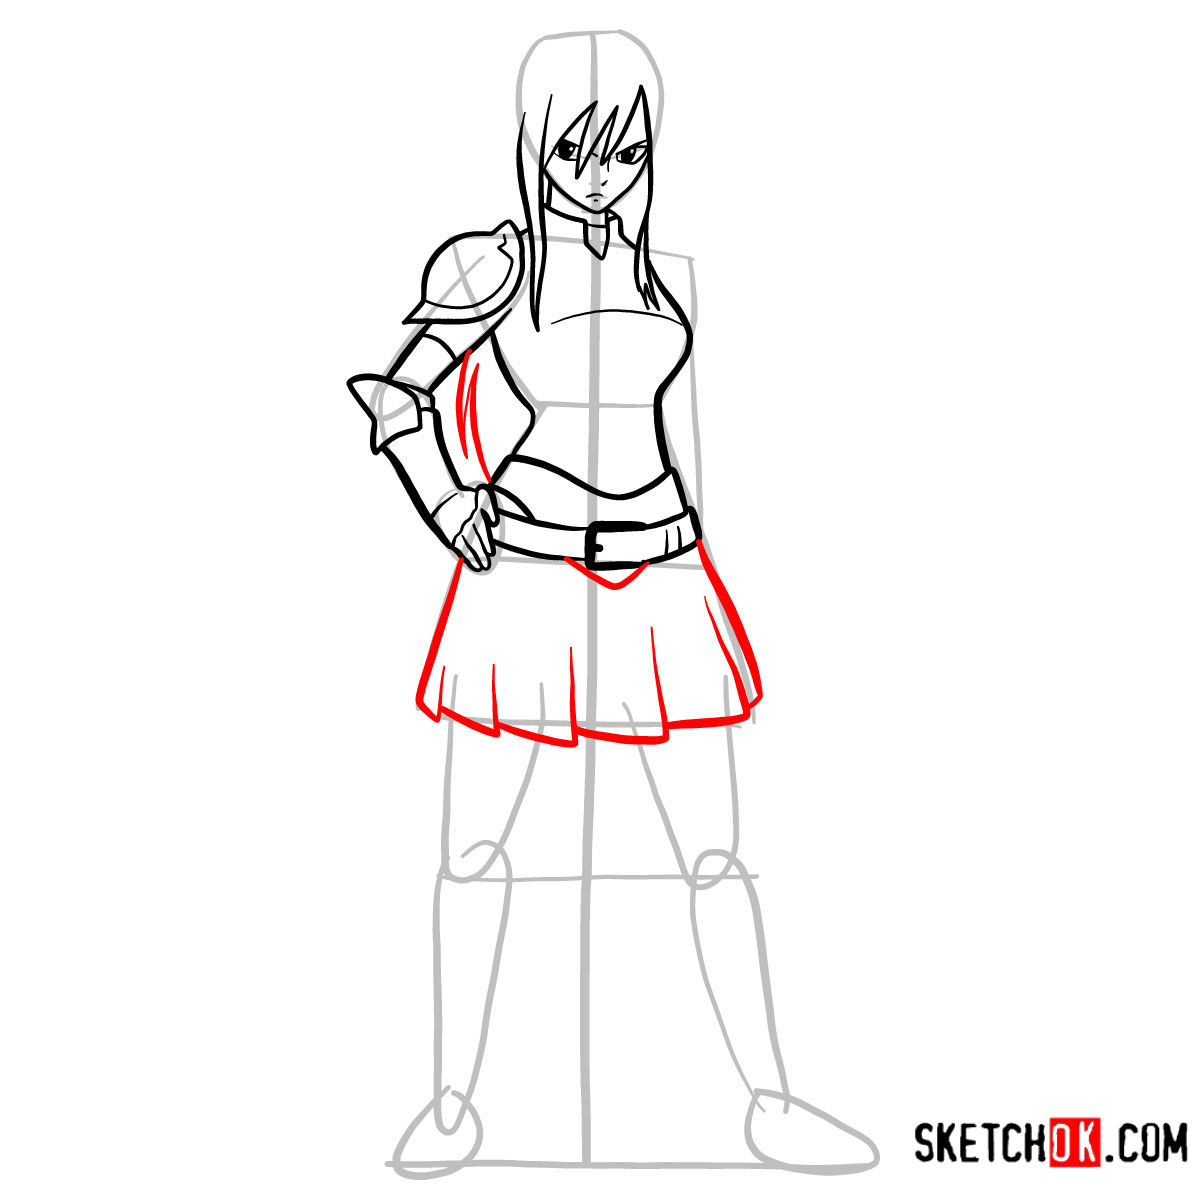 15 steps drawing tutorial of Erza Scarlet (fairy tail) - step 09